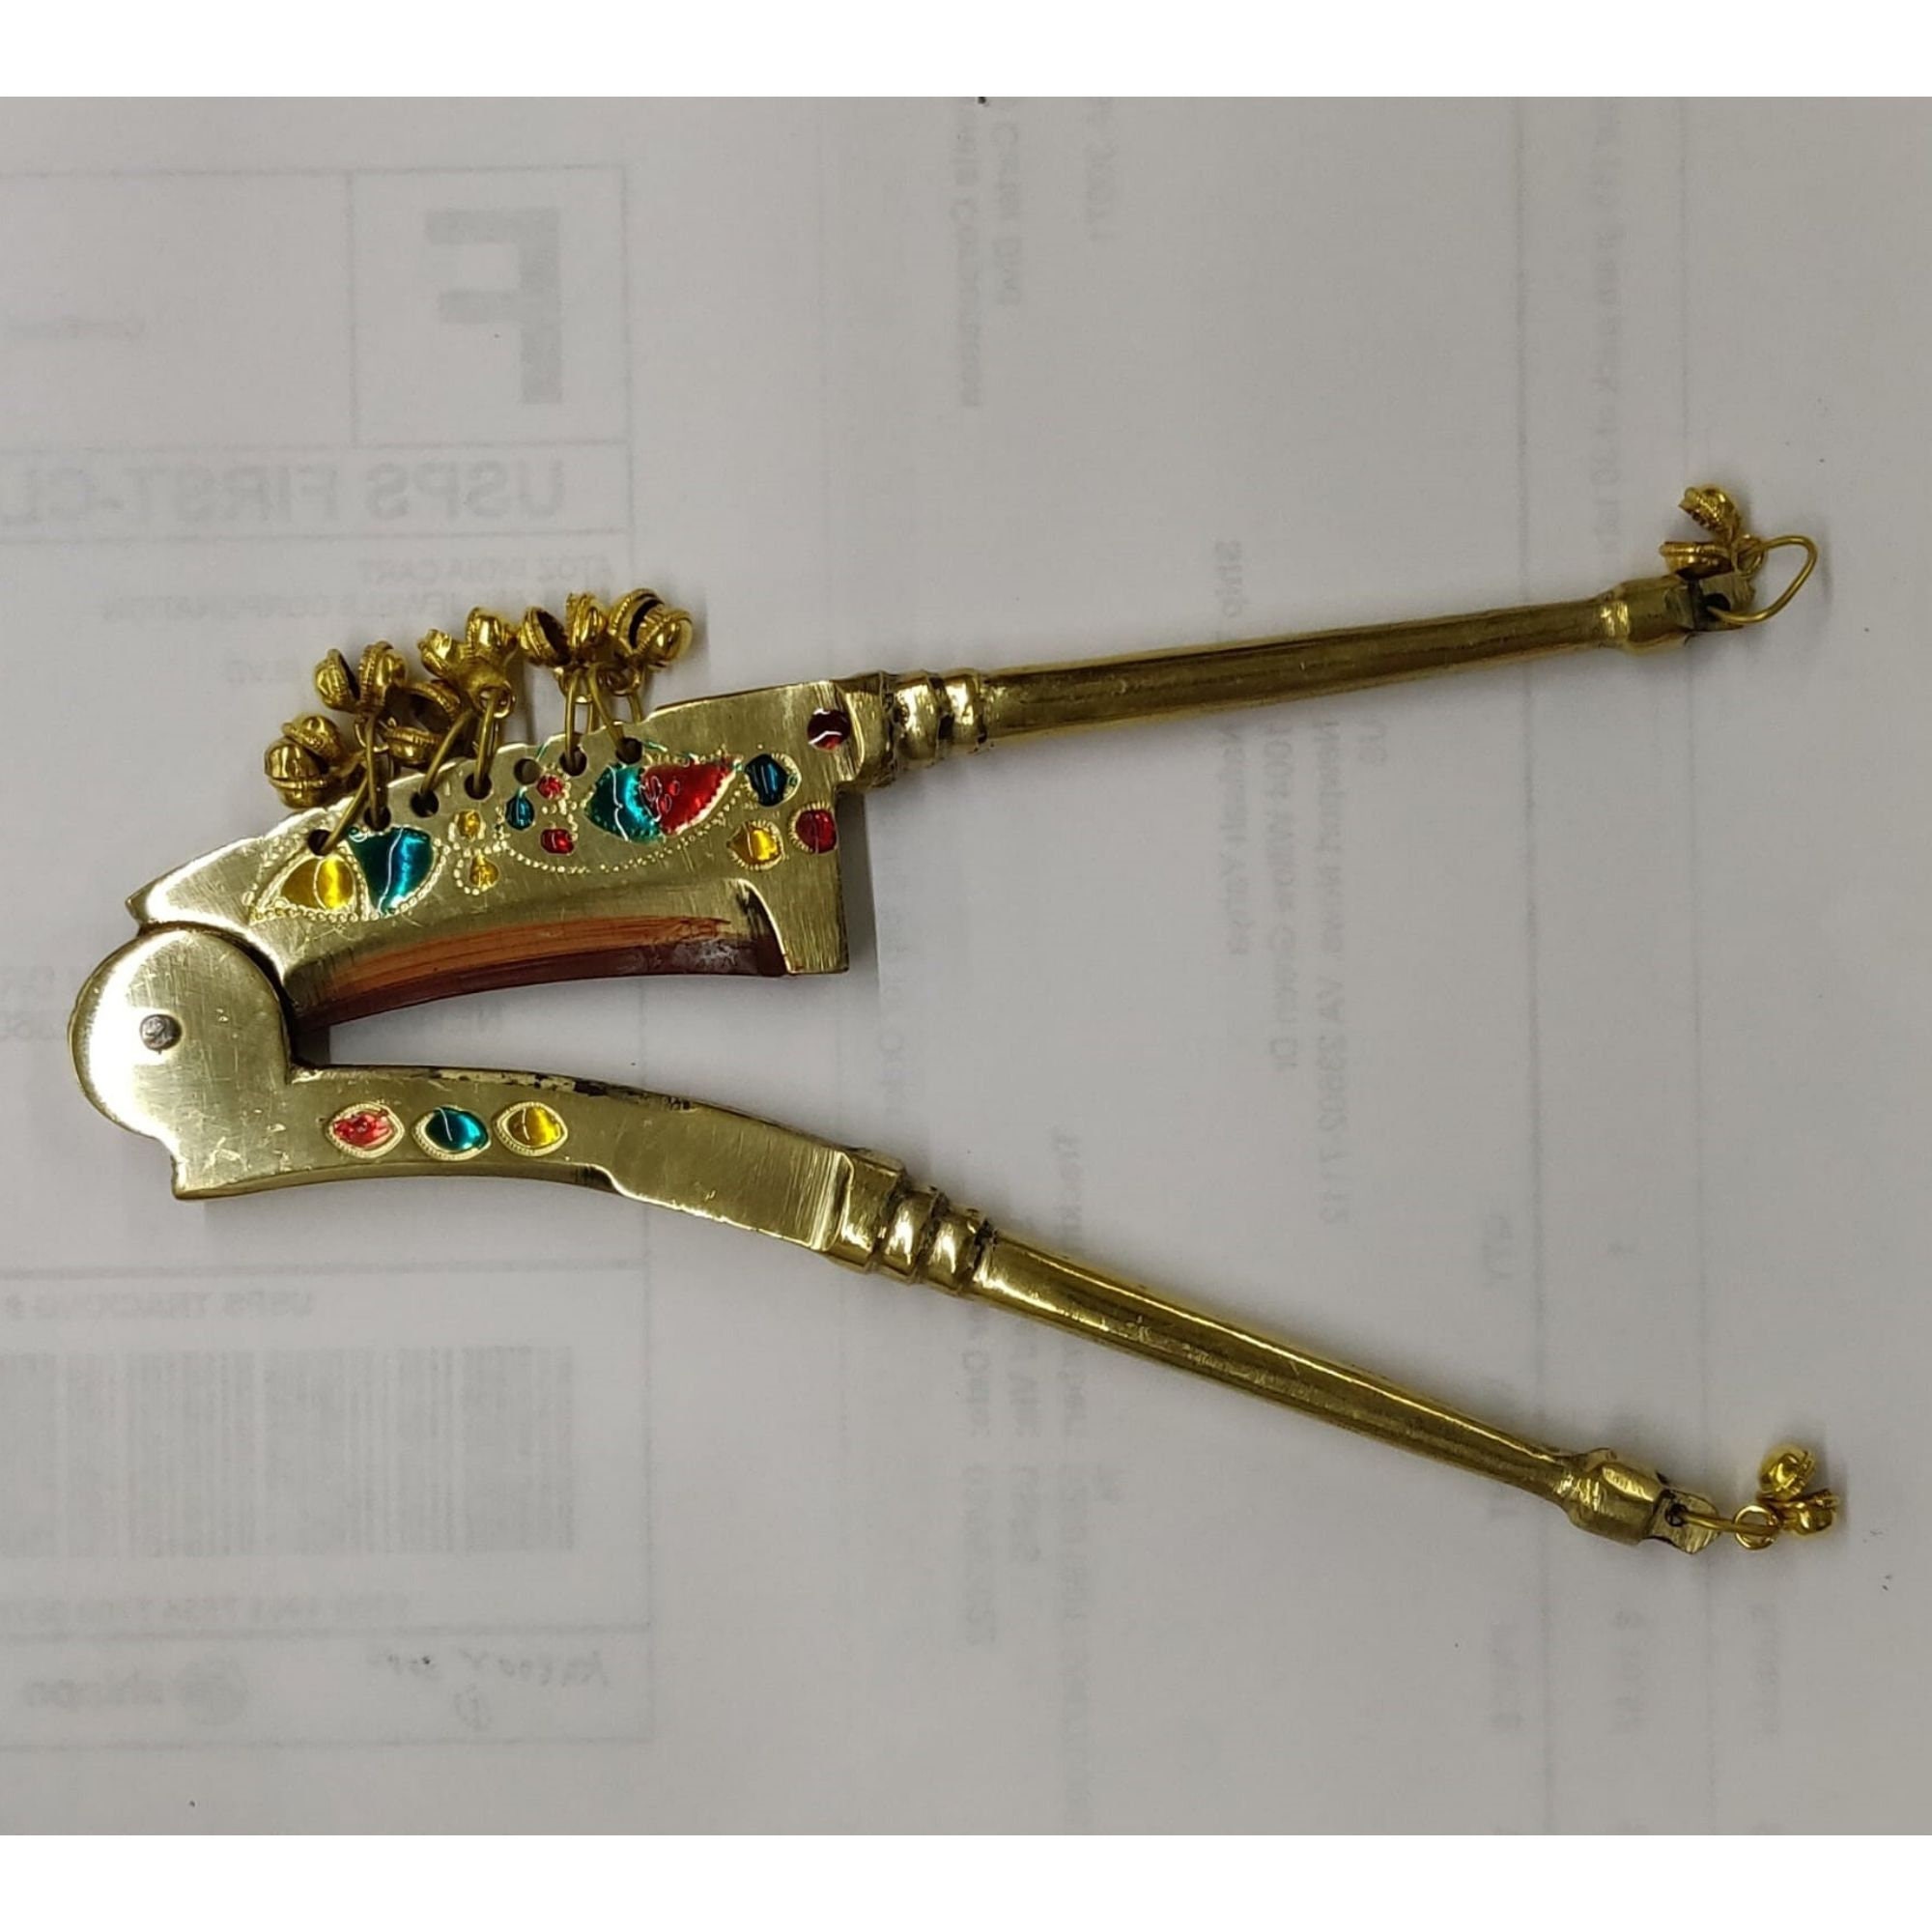 Indian Iron Betel Nuts Cutter Inlaid Gold Work Decorative Collectible Old  Vintage Betel Nut Cutter Beautifully Areca Nut Cutter. I12-73 